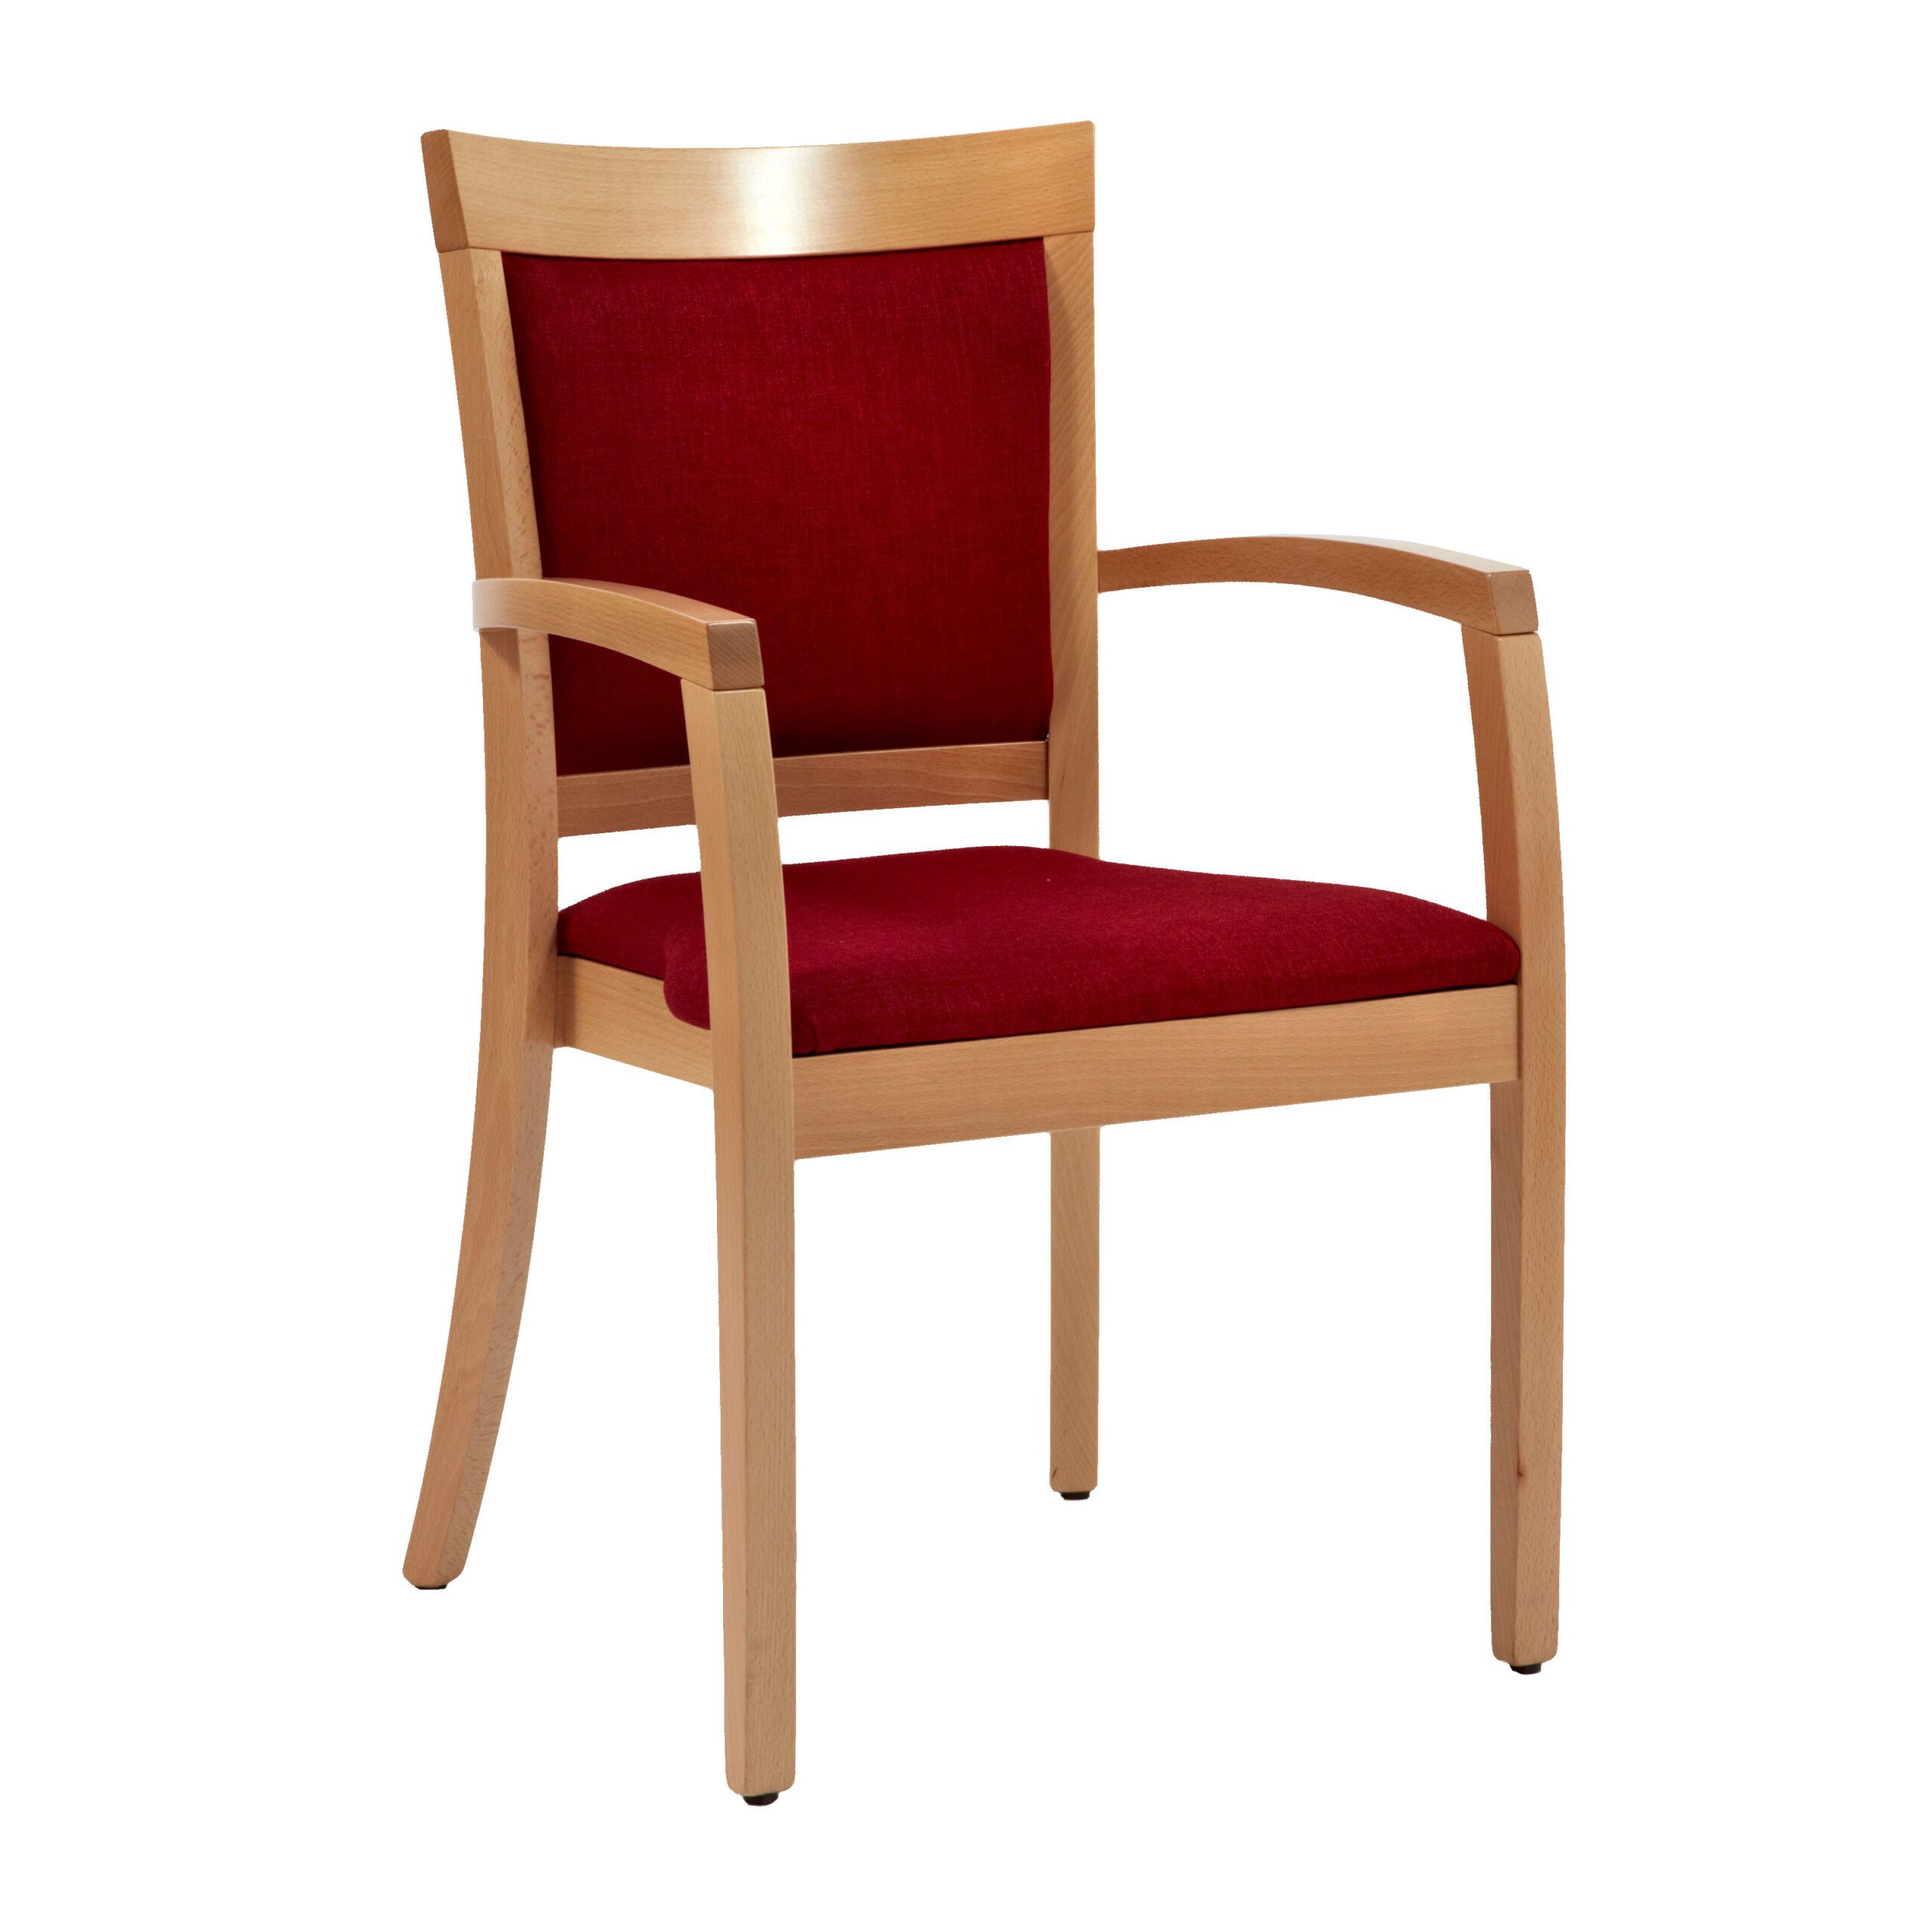 Villette Chair With Arms